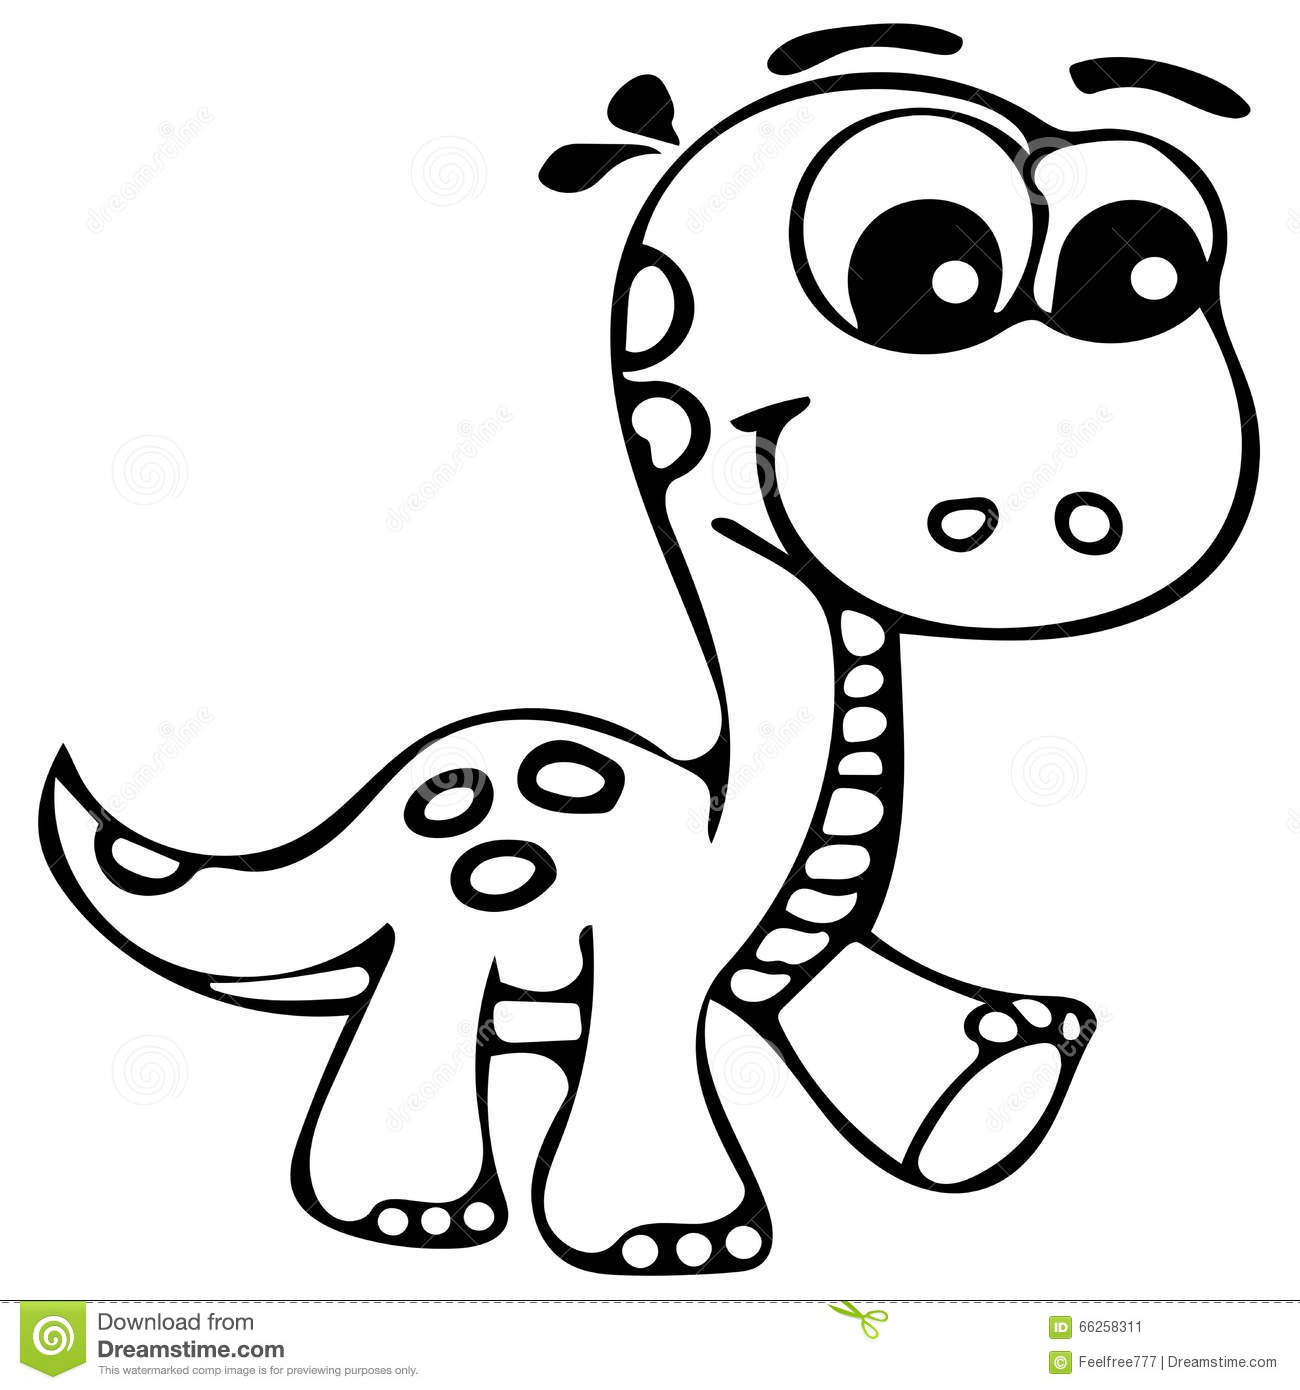 Cute Baby Dinosaur Coloring Pages at GetColorings.com   Free printable ...